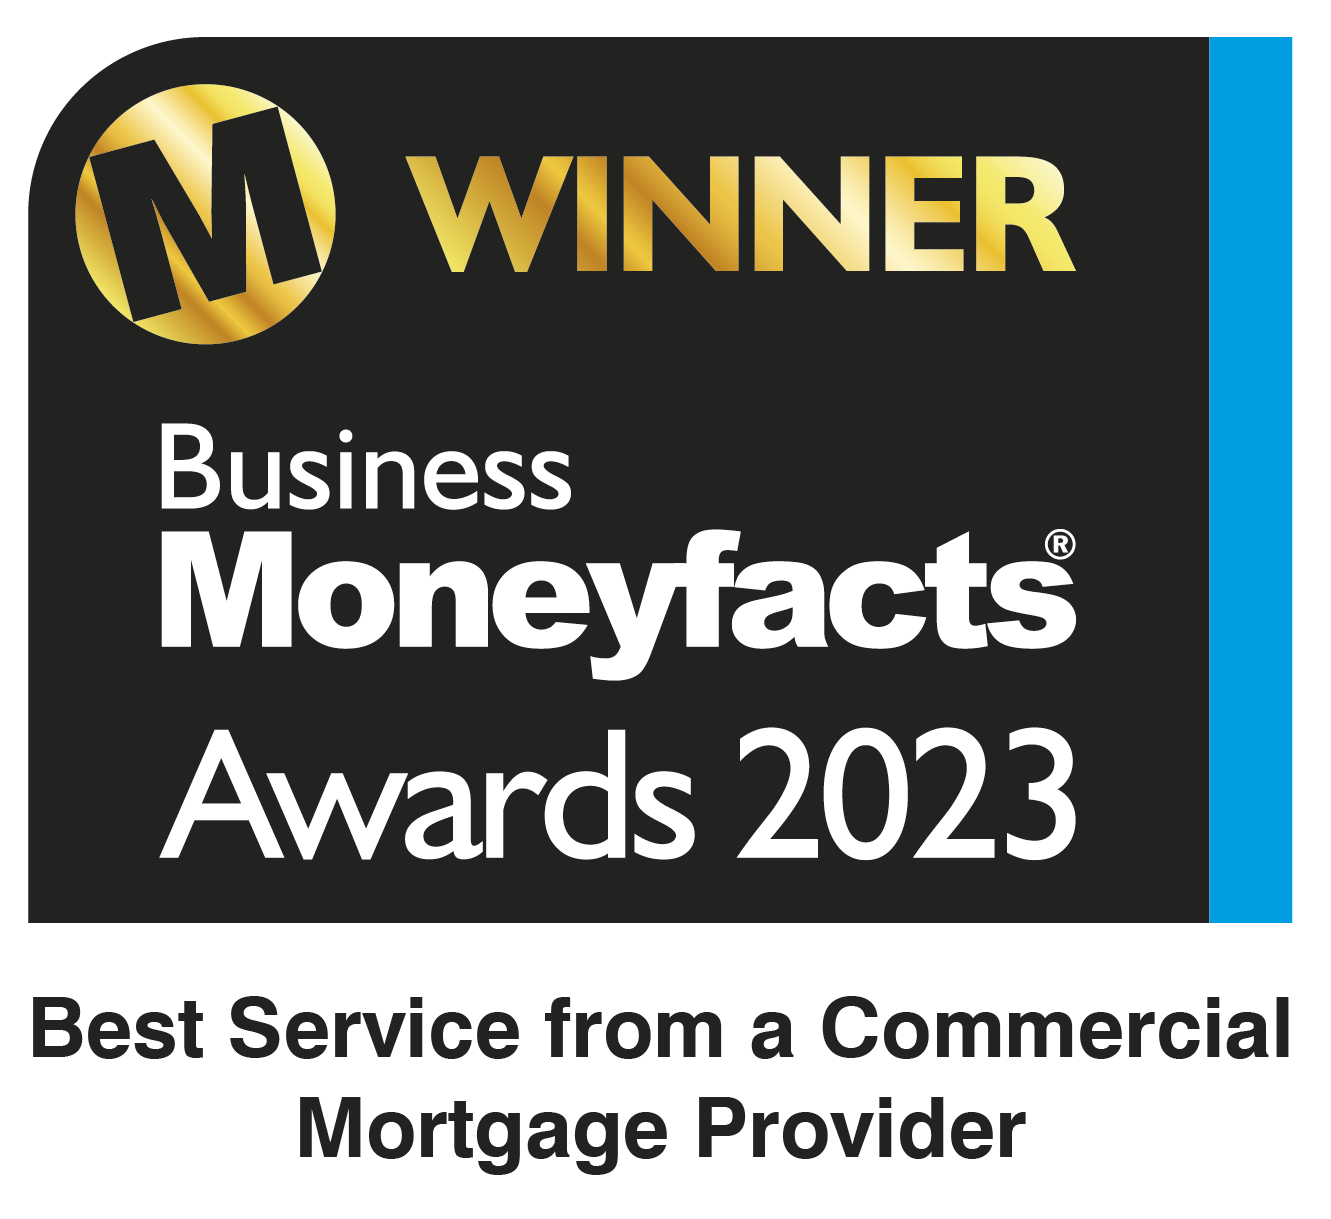 Moneyfacts Awards 2023 Winner - Best Service from a Commercial Mortgage Provider